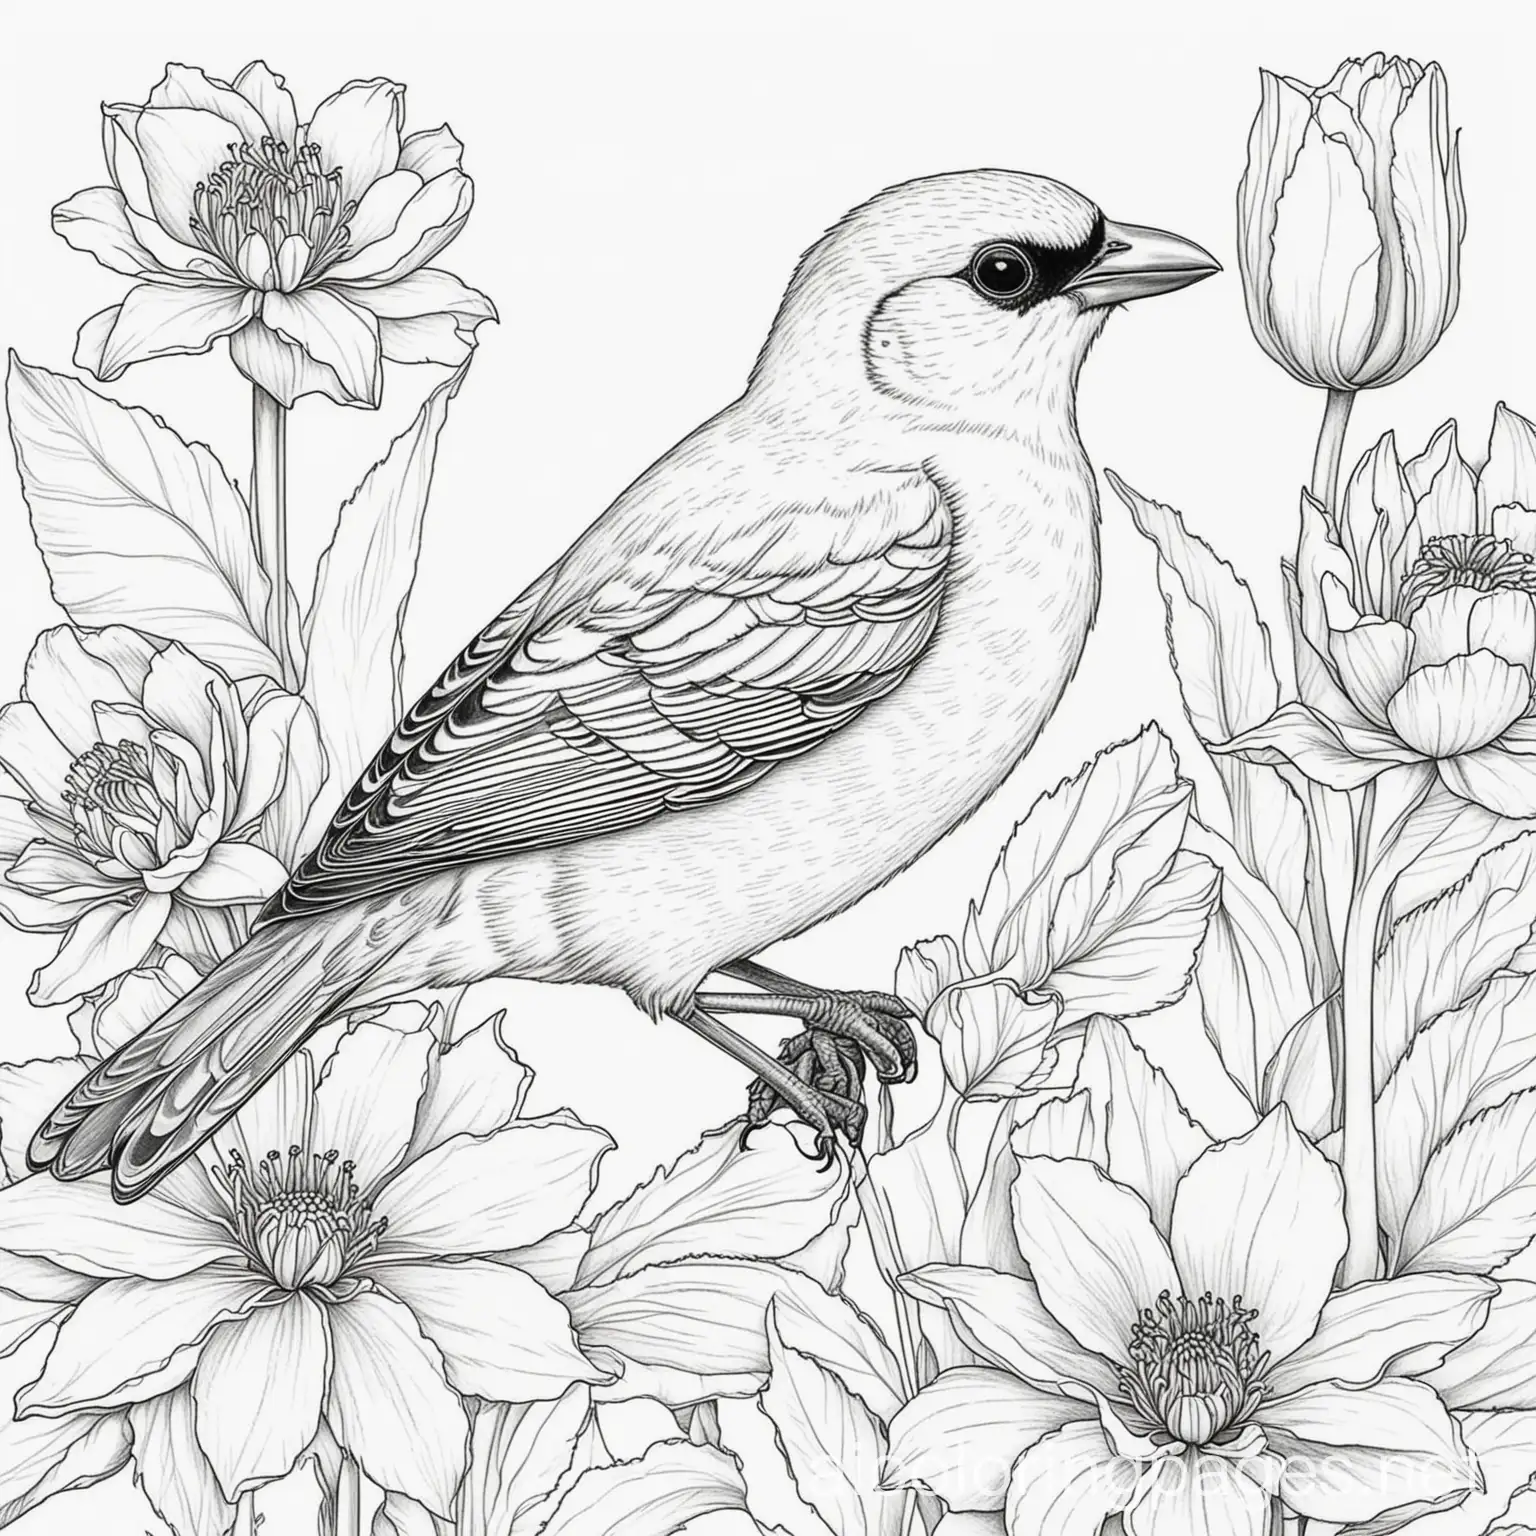 Paradise Tanager with tulips and dahlia 
flowers
, Coloring Page, black and white, line art, white background, Simplicity, Ample White Space. The background of the coloring page is plain white to make it easy for young children to color within the lines. The outlines of all the subjects are easy to distinguish, making it simple for kids to color without too much difficulty